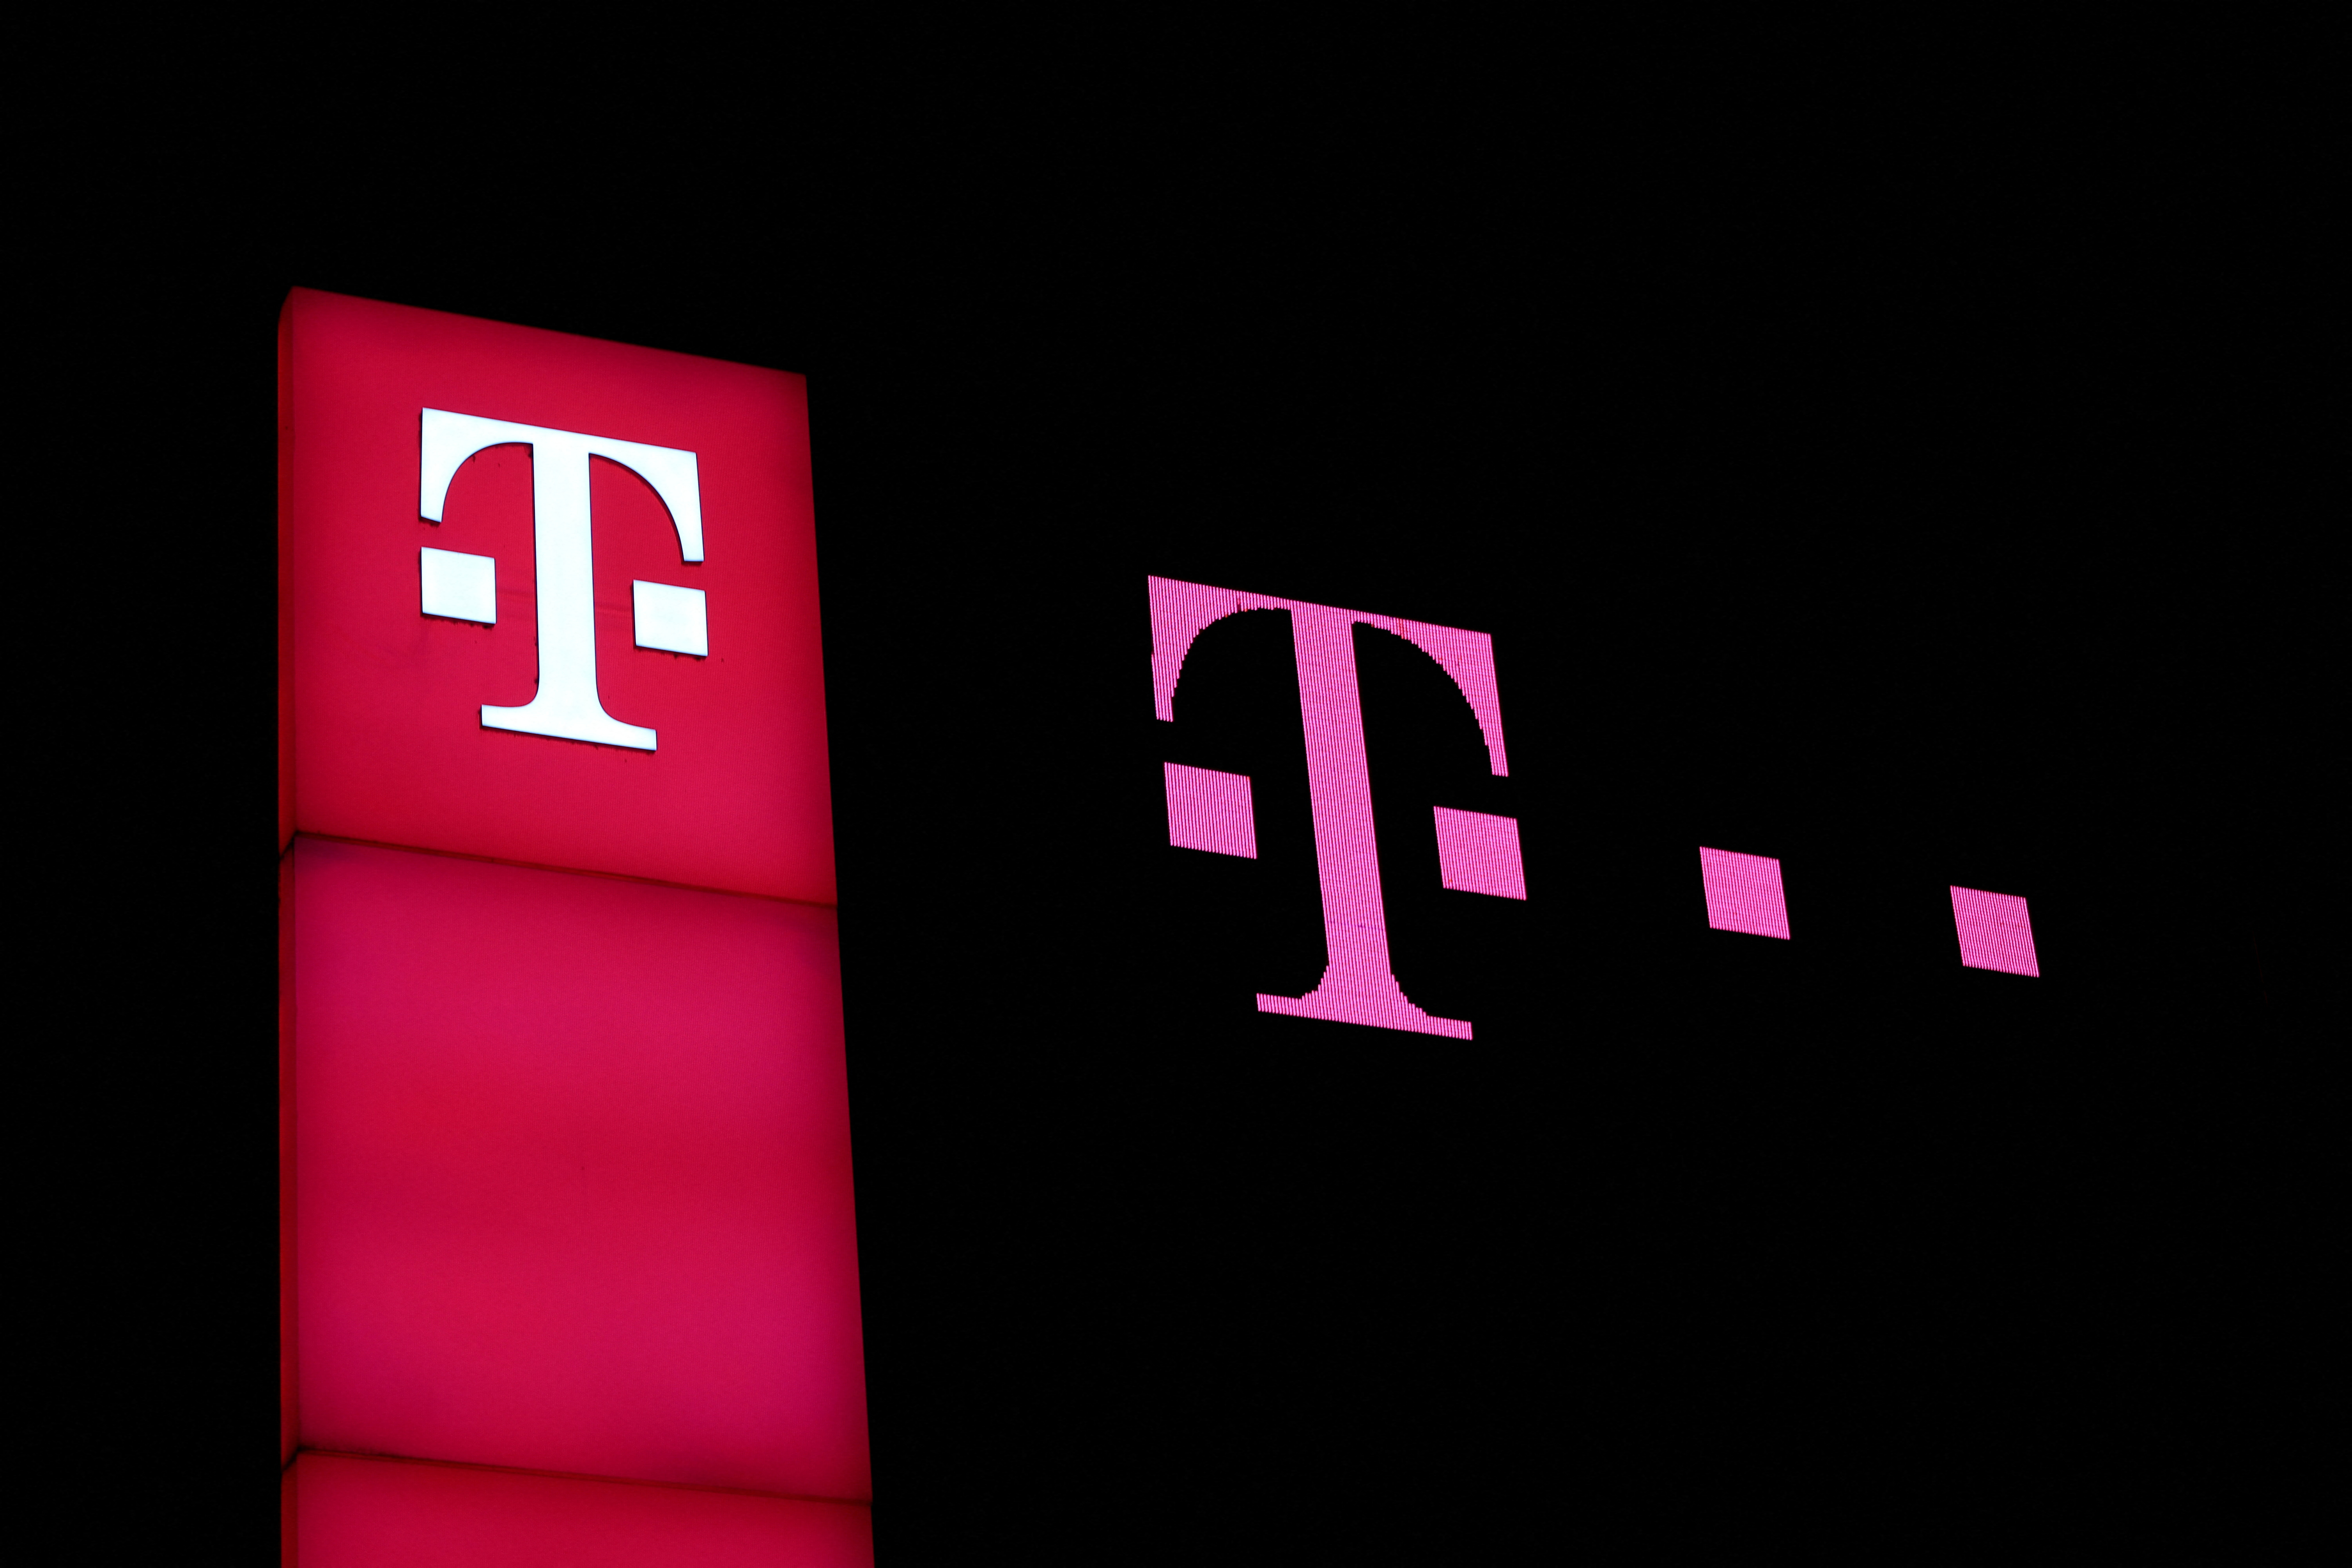 Deutsche Telekom signs are pictured on the headquarters of the German telecoms giant in Bonn